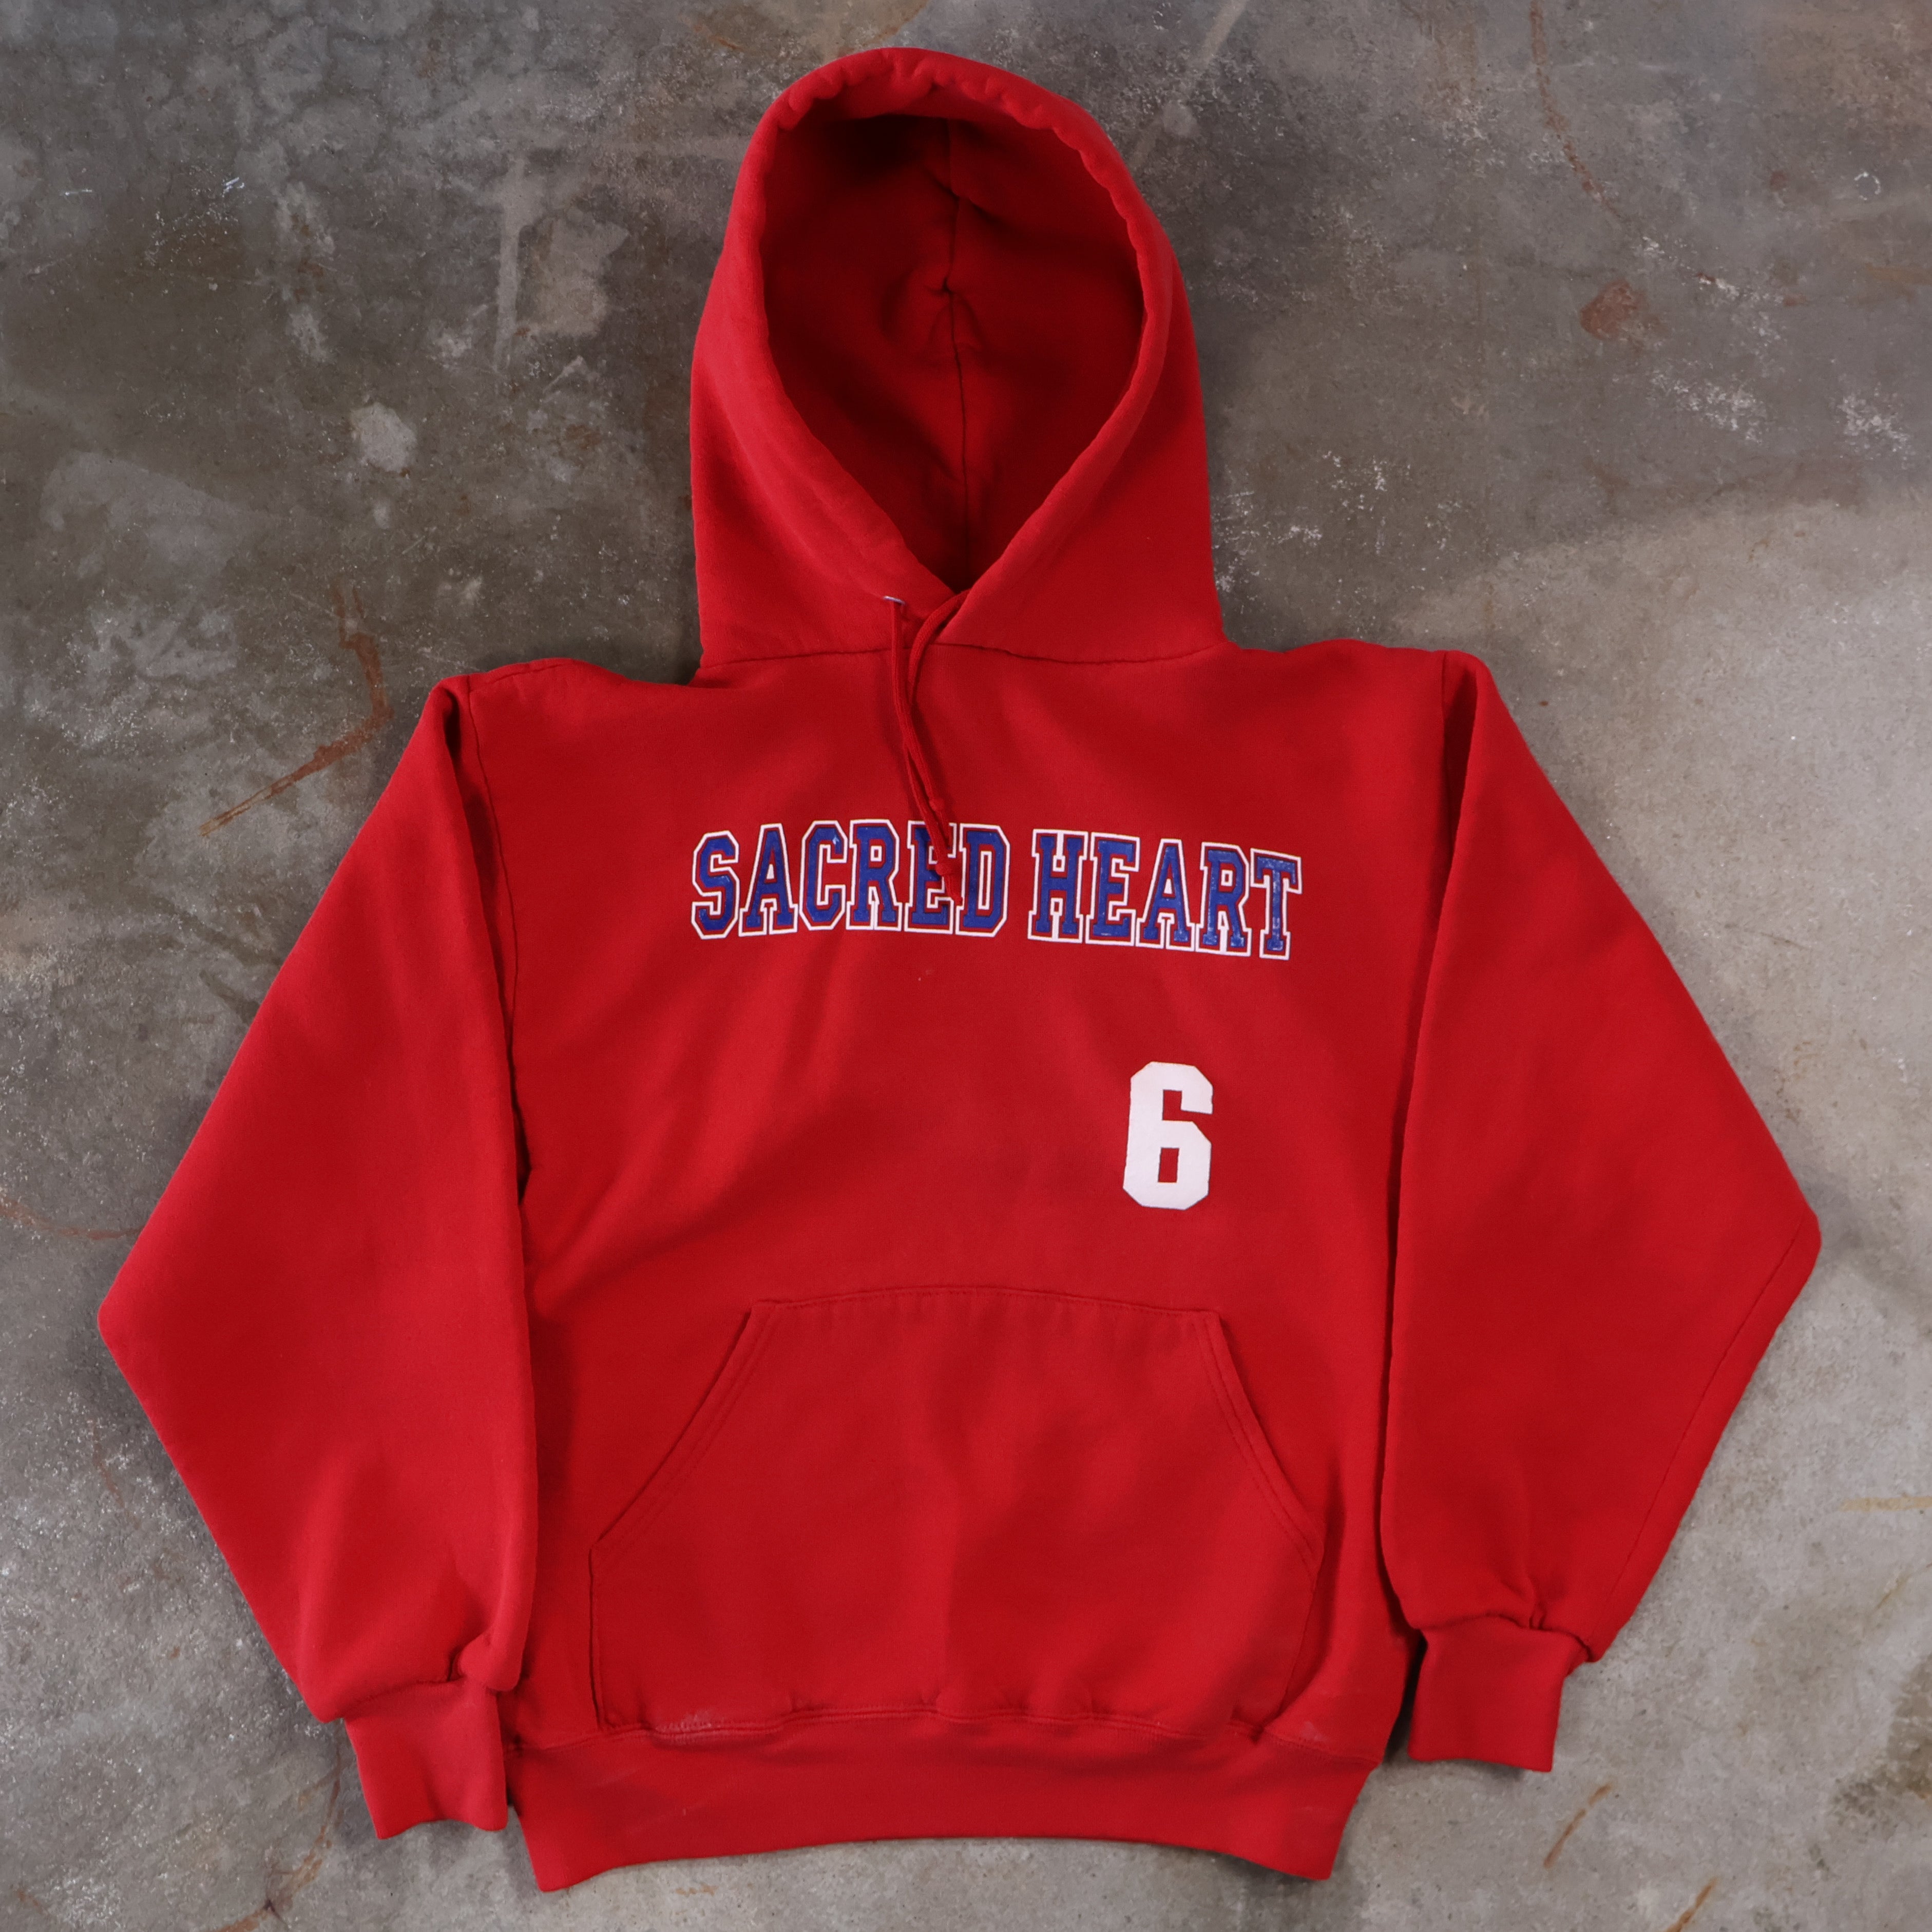 Sacred Hearth Red Hoodie 90s (Small)